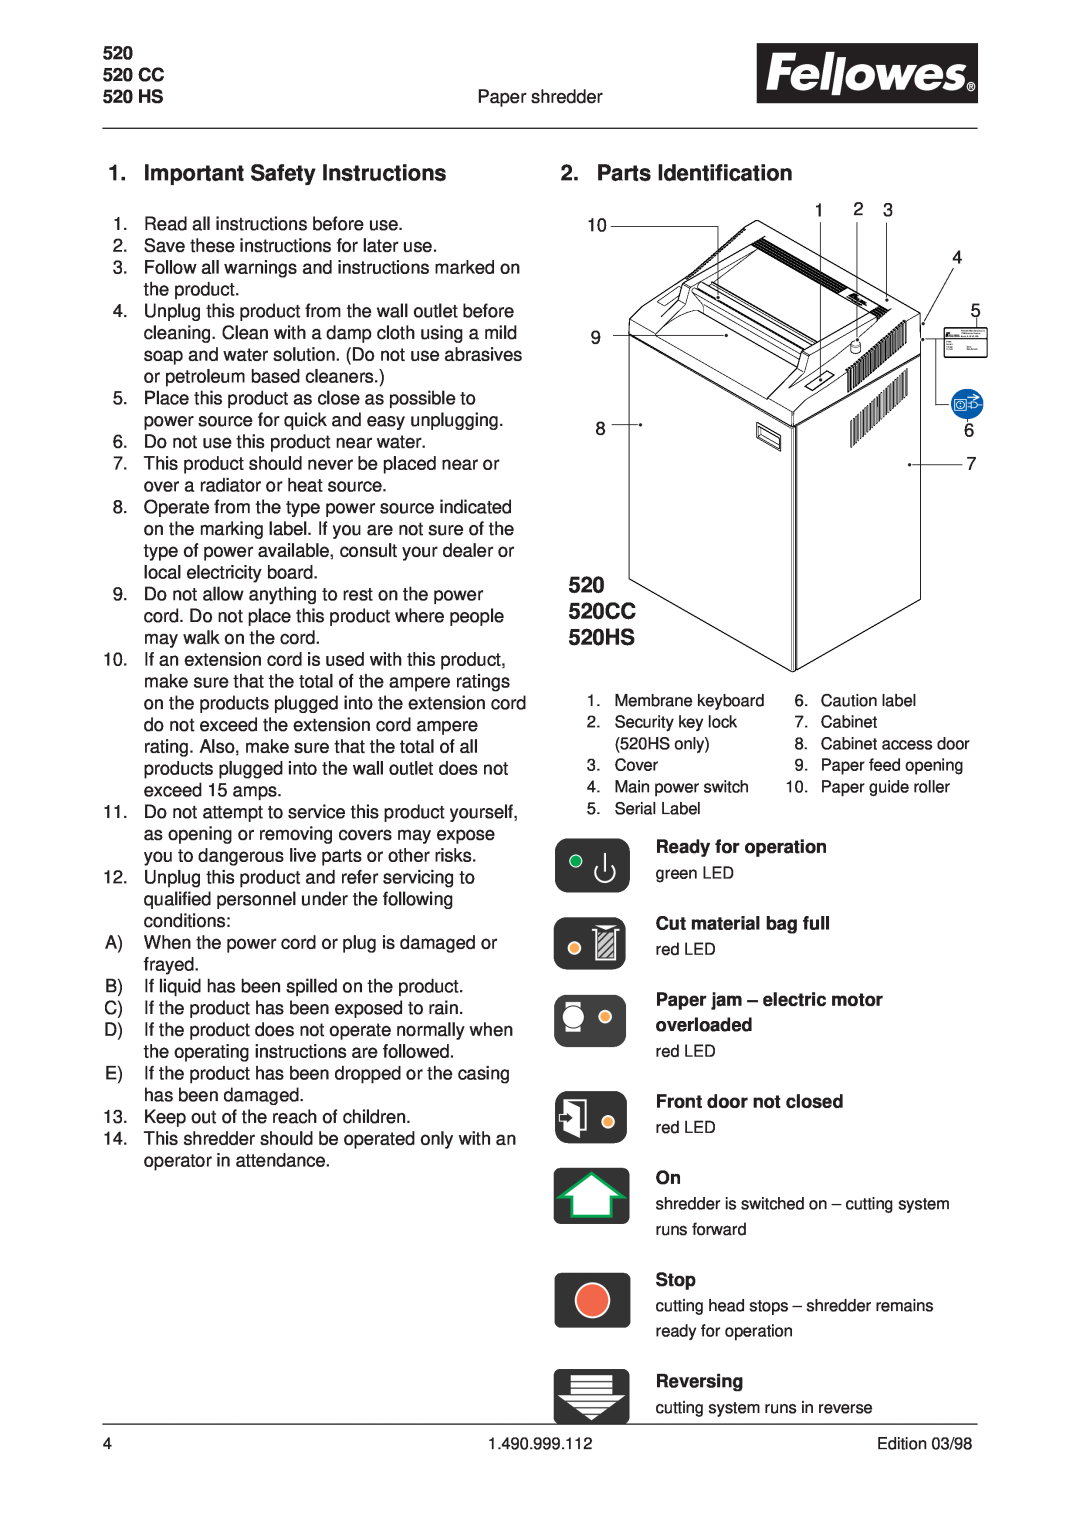 Fellowes operating instructions Important Safety Instructions, Parts Identification, 520 520CC 520HS 